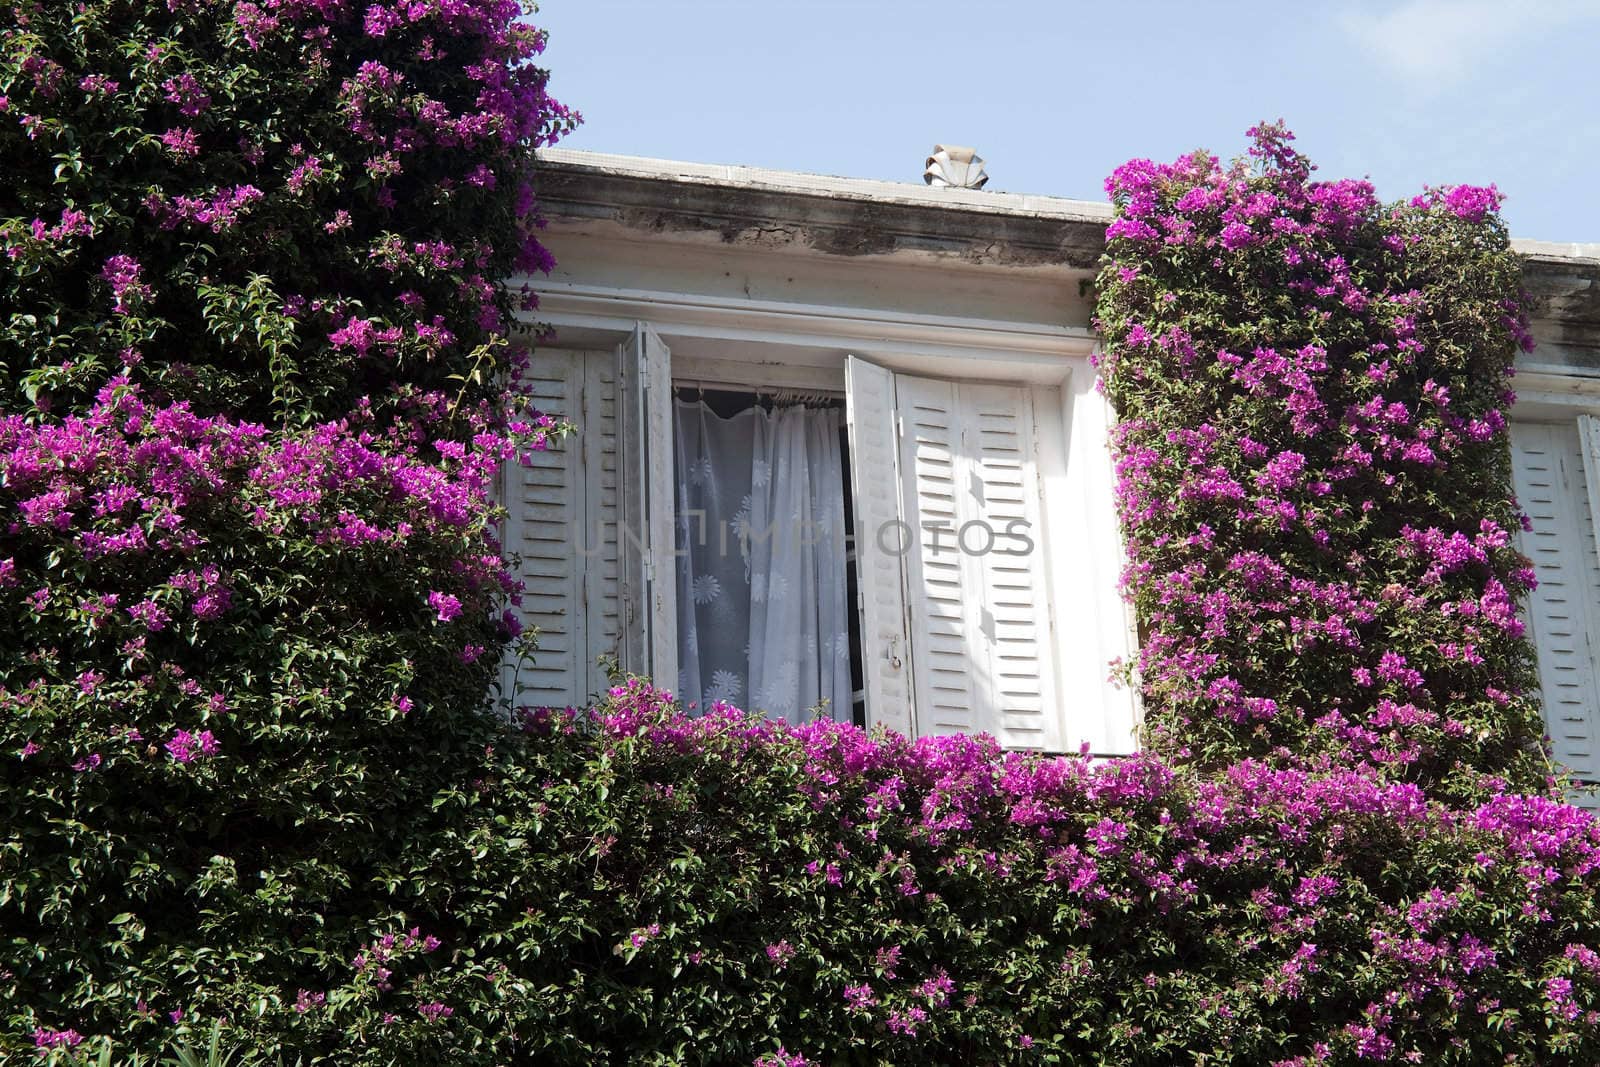 An window surrounded by greenery and pink flowers